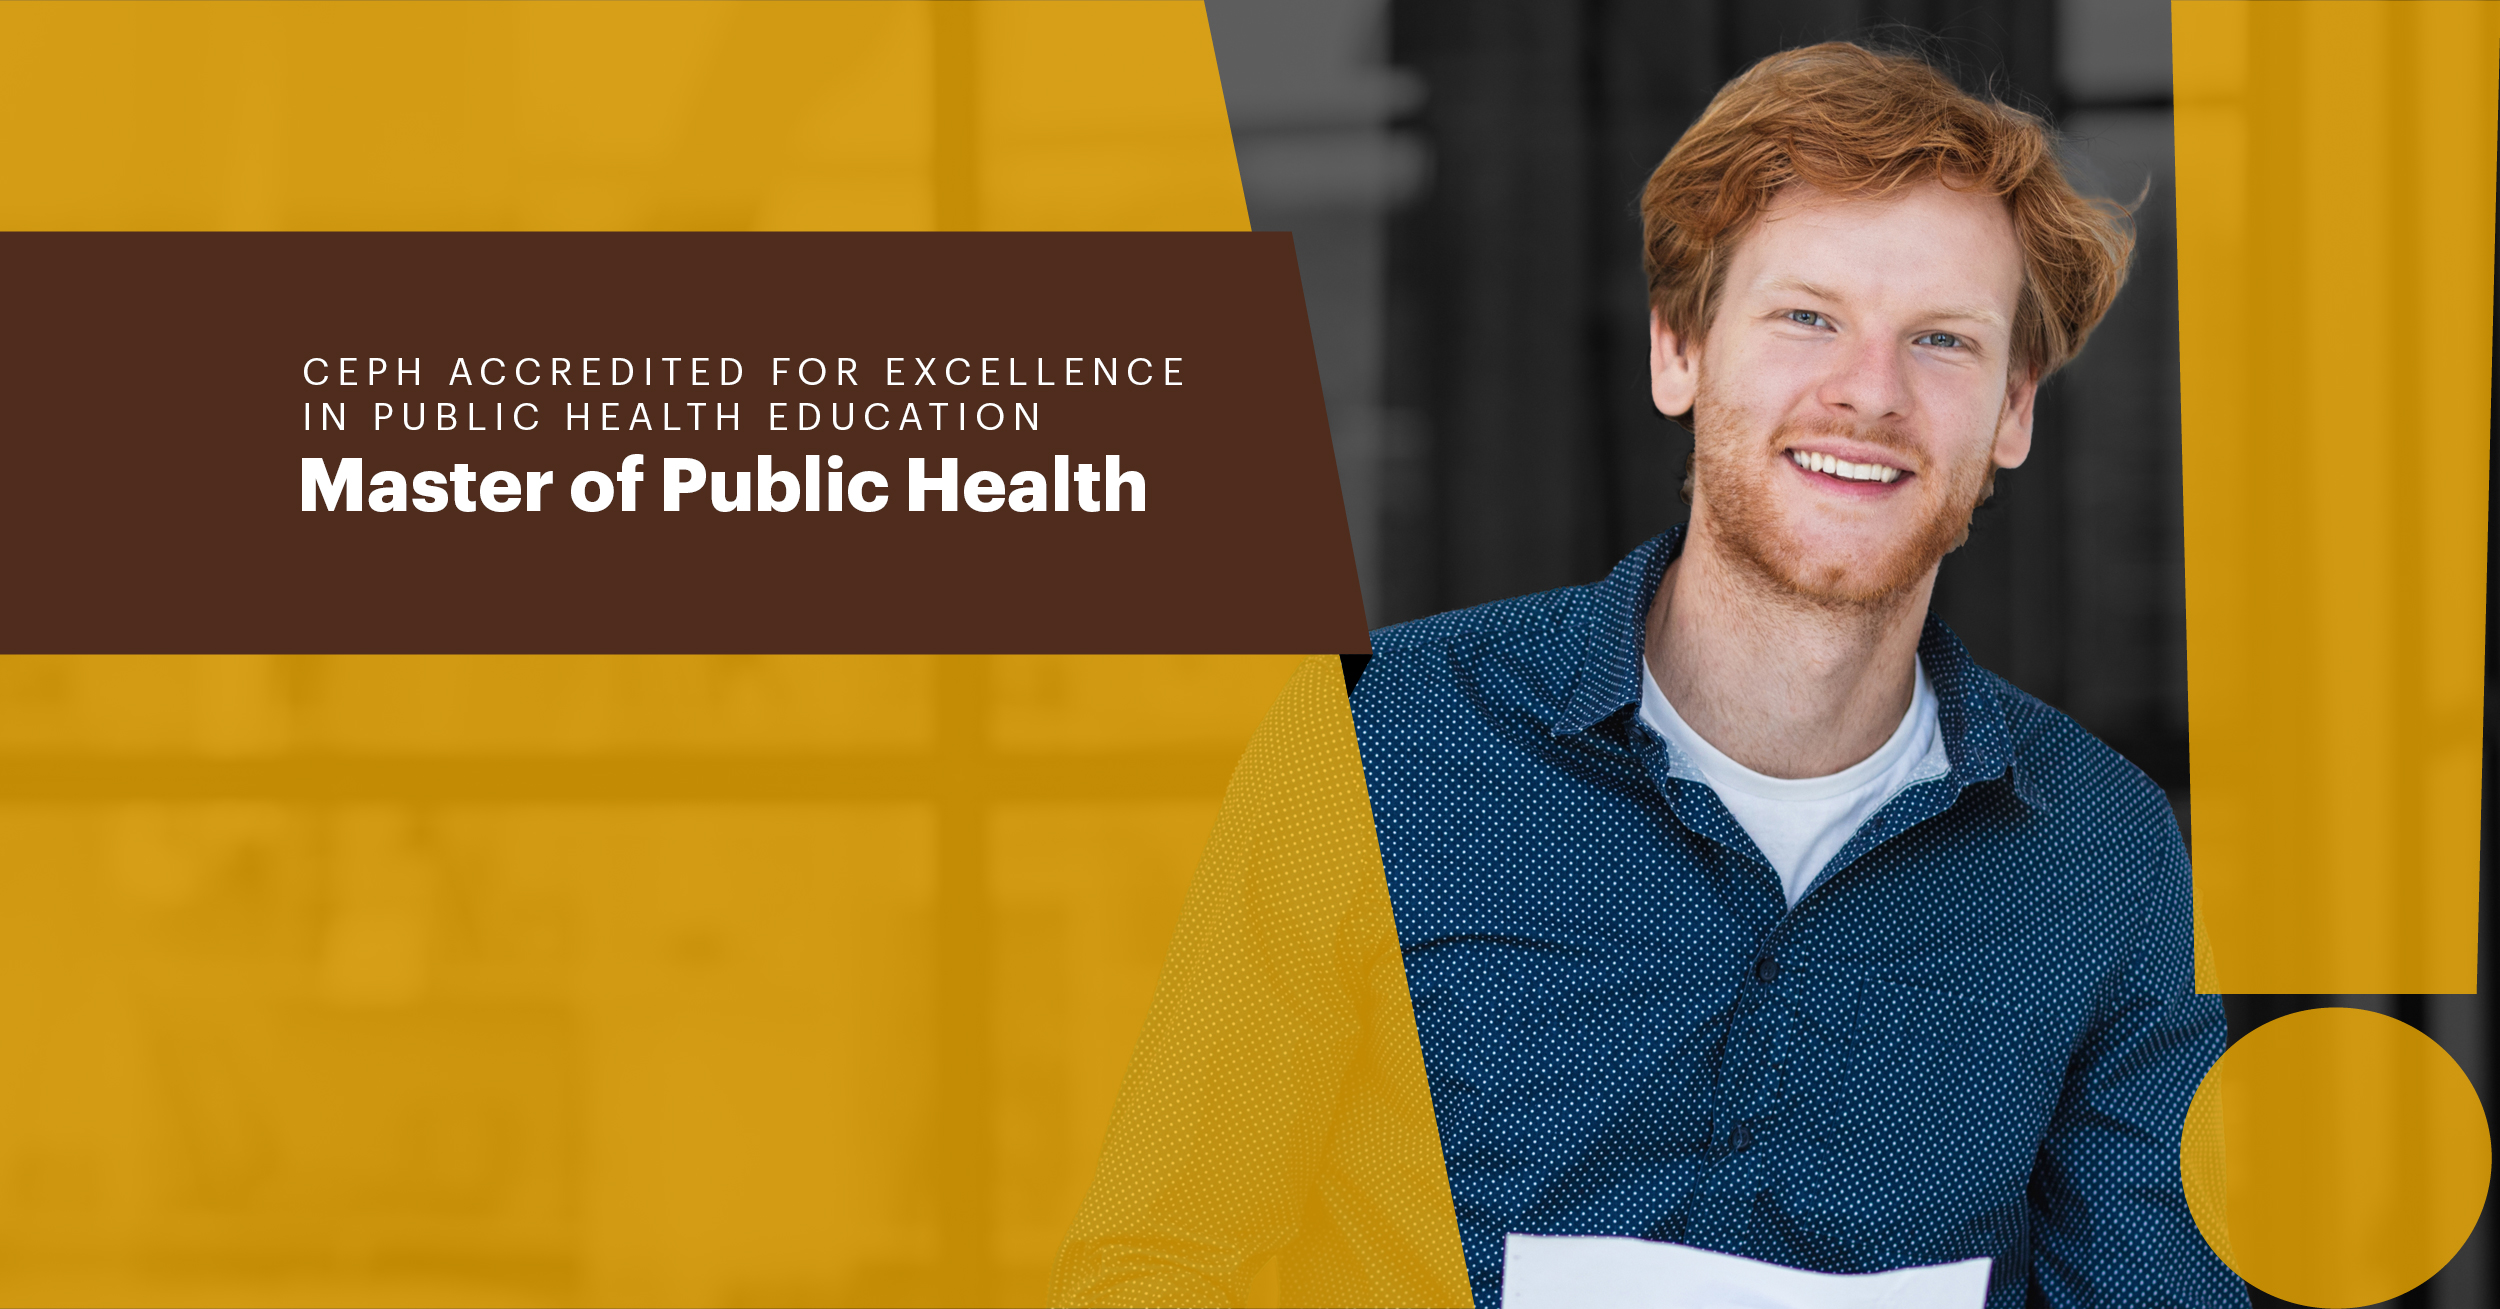 CEPH Accredited for excellence in public health education Master of Public Health